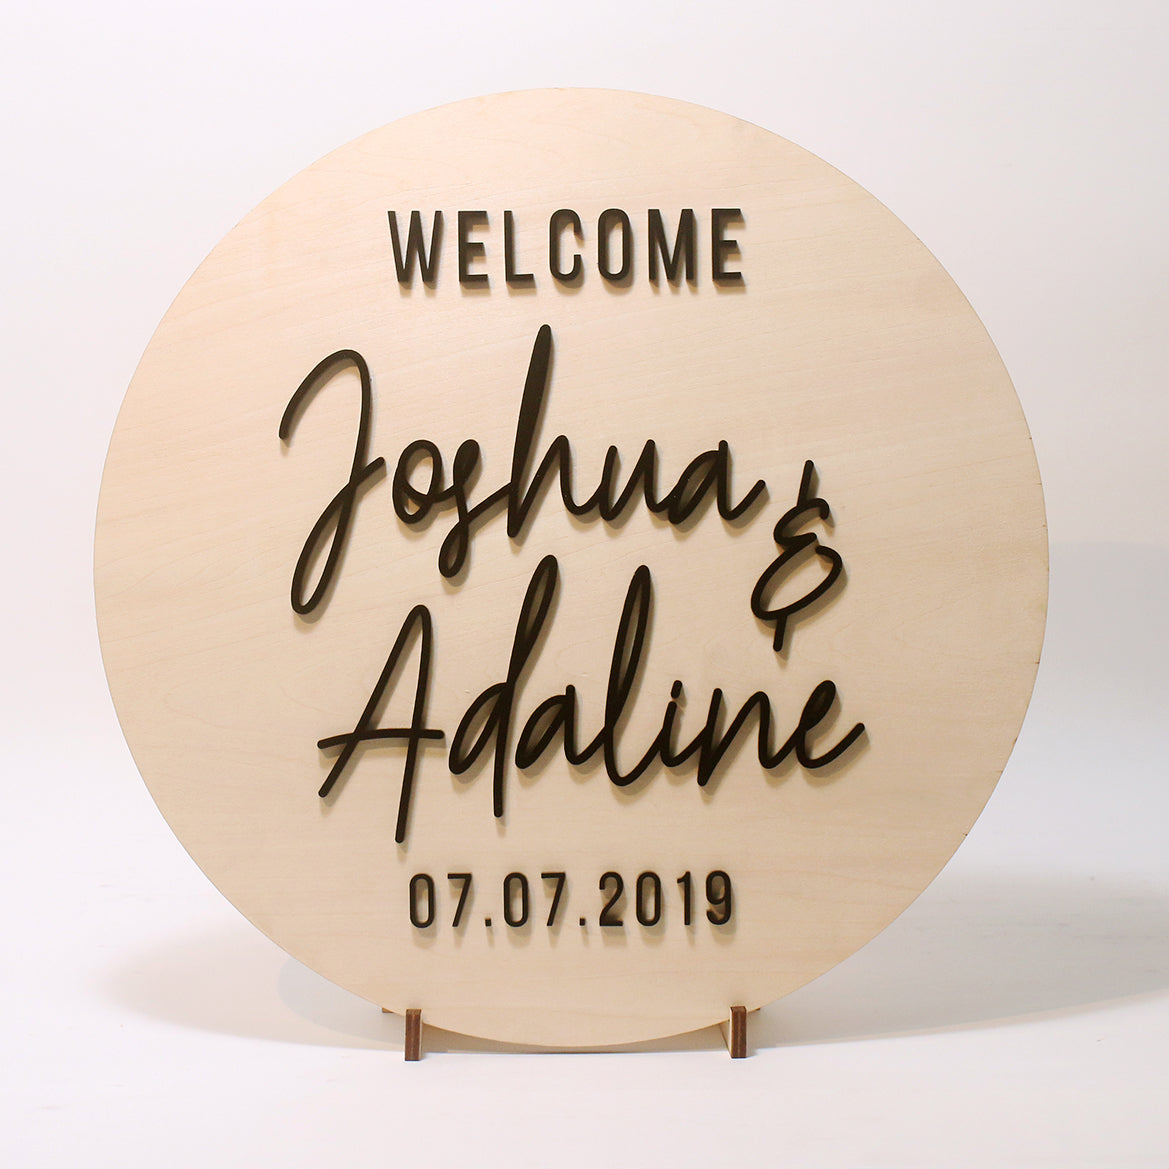 Wedding Sign - Round Wood Signage with Pop-up Text